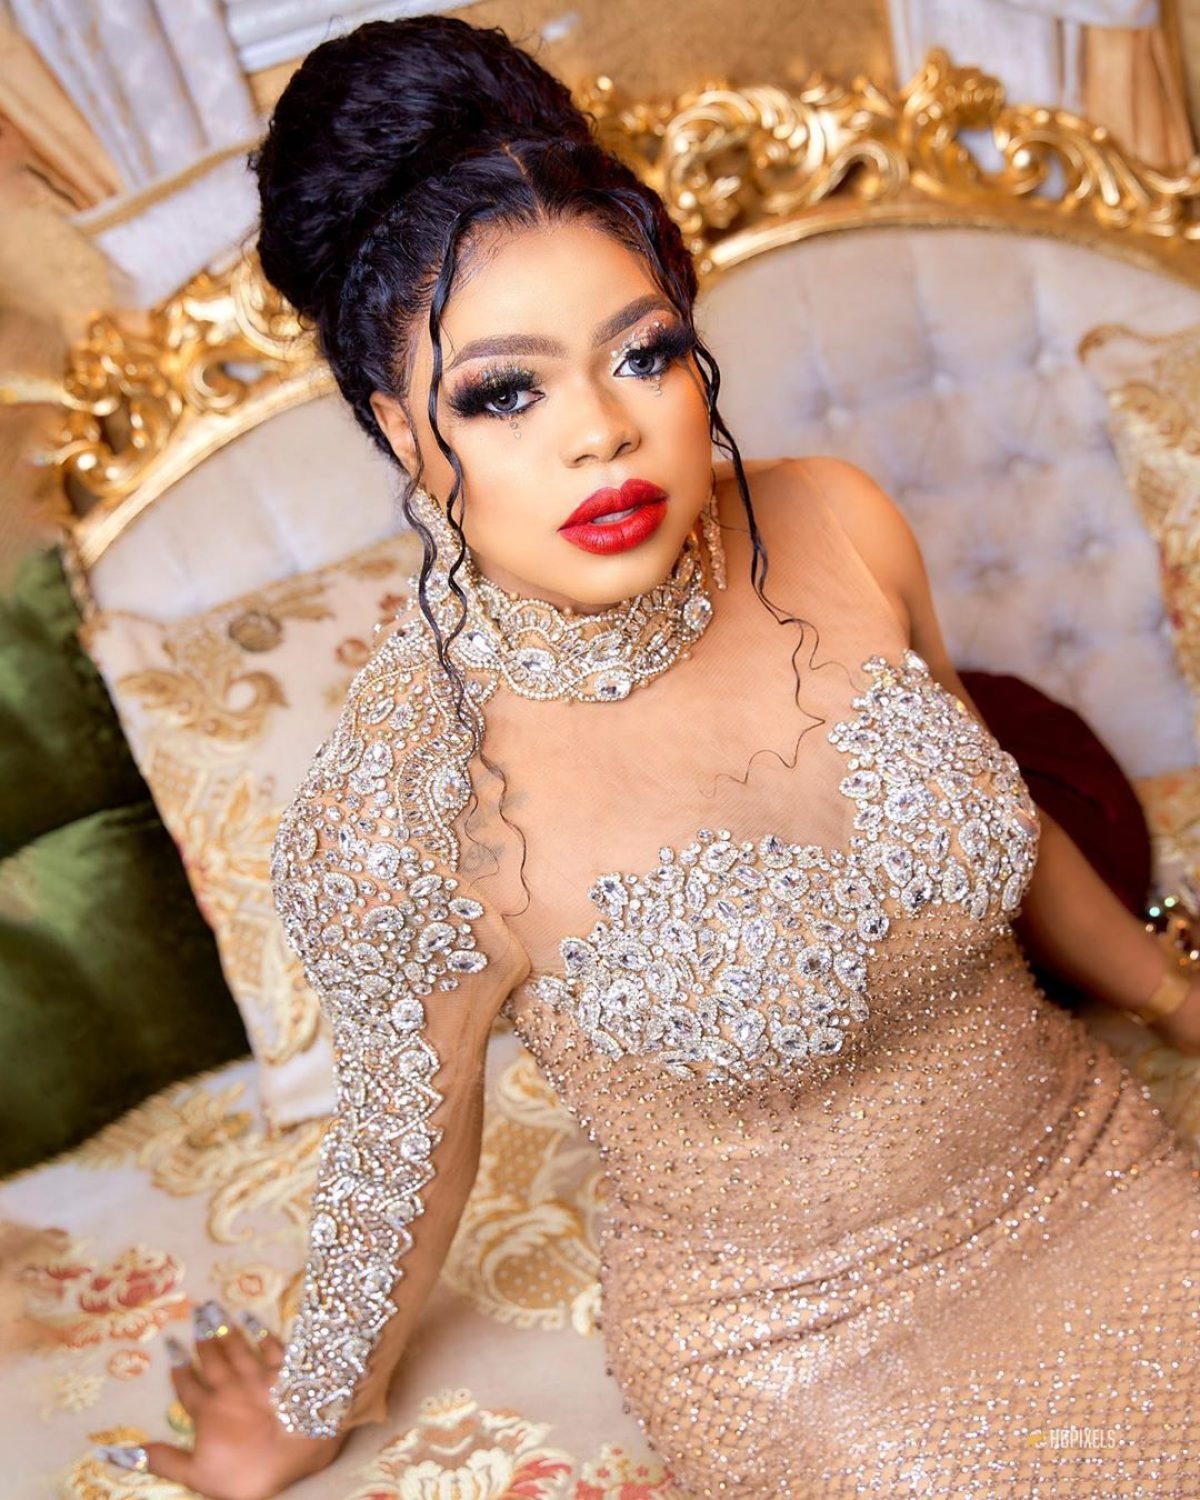 7 things you should know about bobrisky